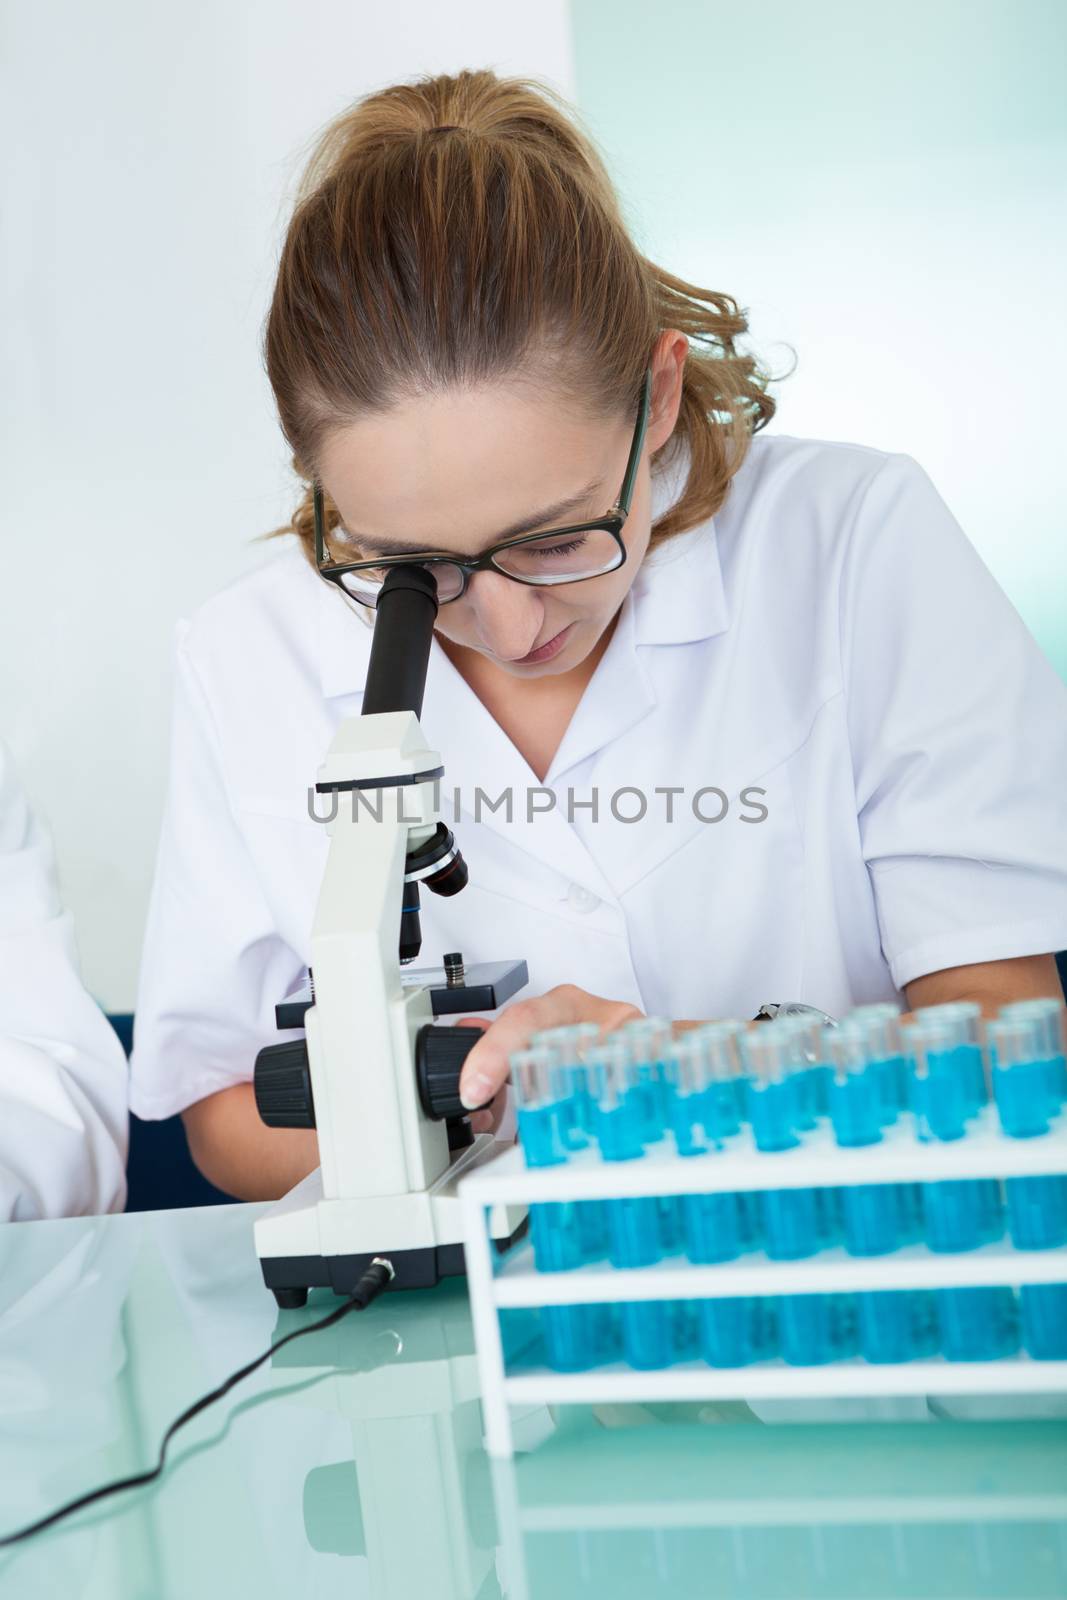 Female laboratory technician using a monocular microscope to read test results which she is recording on paper